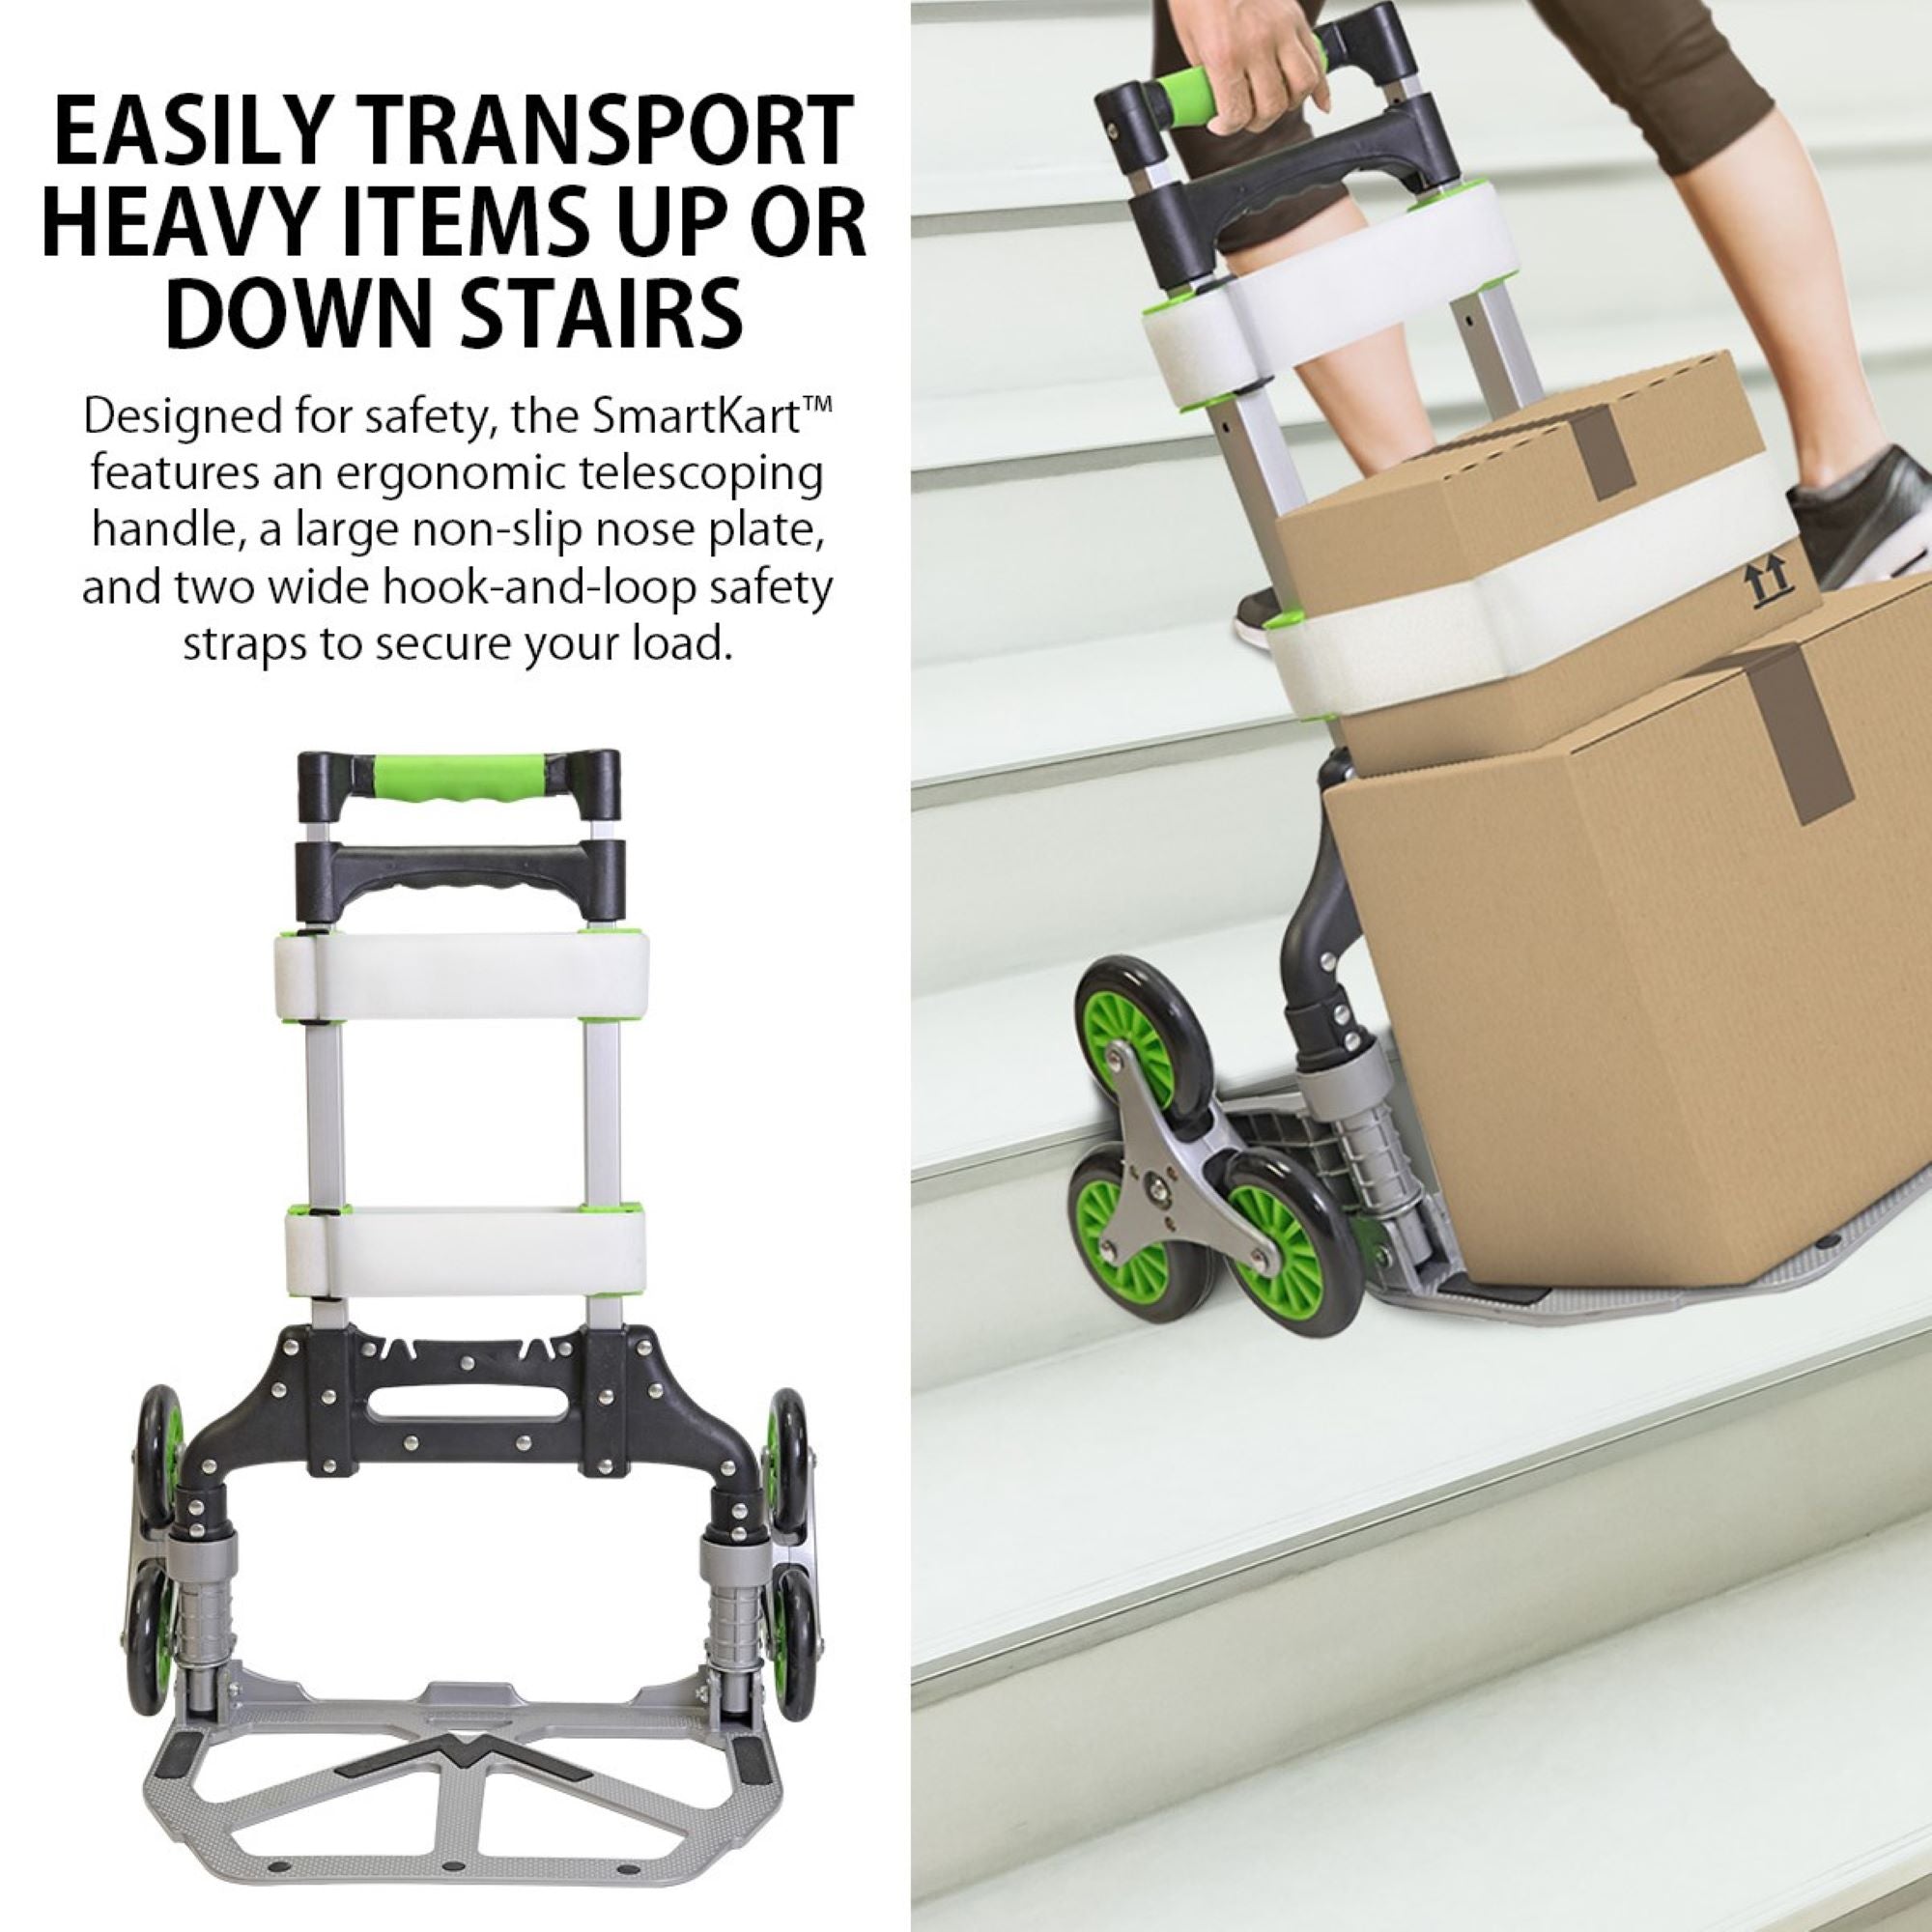 On the left is a product shot of the hand truck on a white background with text above reading, "Easily transport heavy items up or down stairs: Designed for safety, the SmartKart features an ergonomic telescoping handle, a large non-slip nose plate, and two wide hook-and-loop safety straps to secure your load." On the right is a lifestyle image of a person pulling the cart, loaded with two cardboard boxes, up a flight of stairs